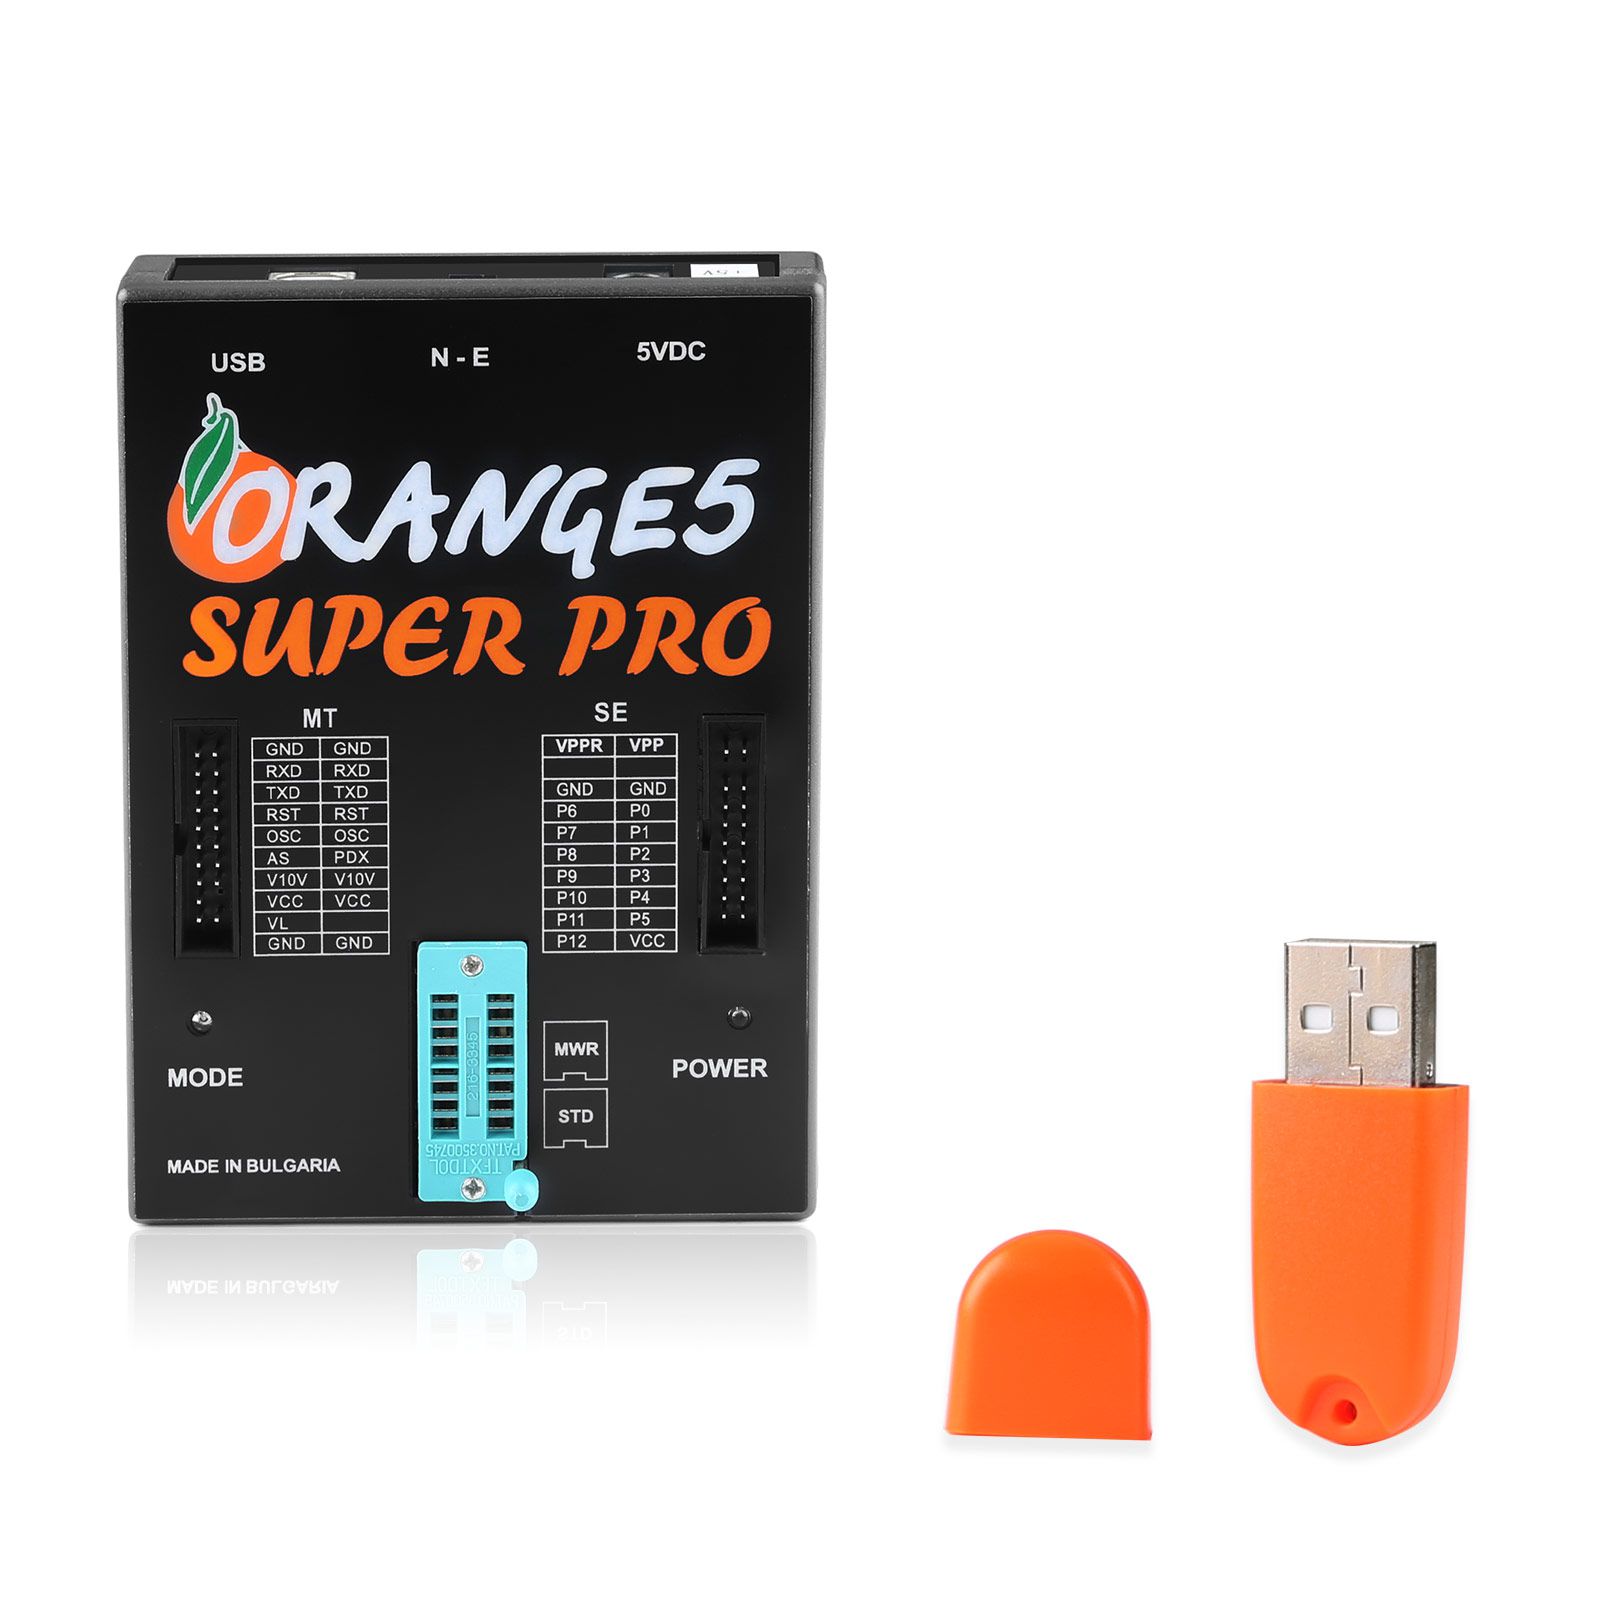 Main Unit of Orange5 Super Pro V1.35 Programming Tool and USB Dongle Without Adapters